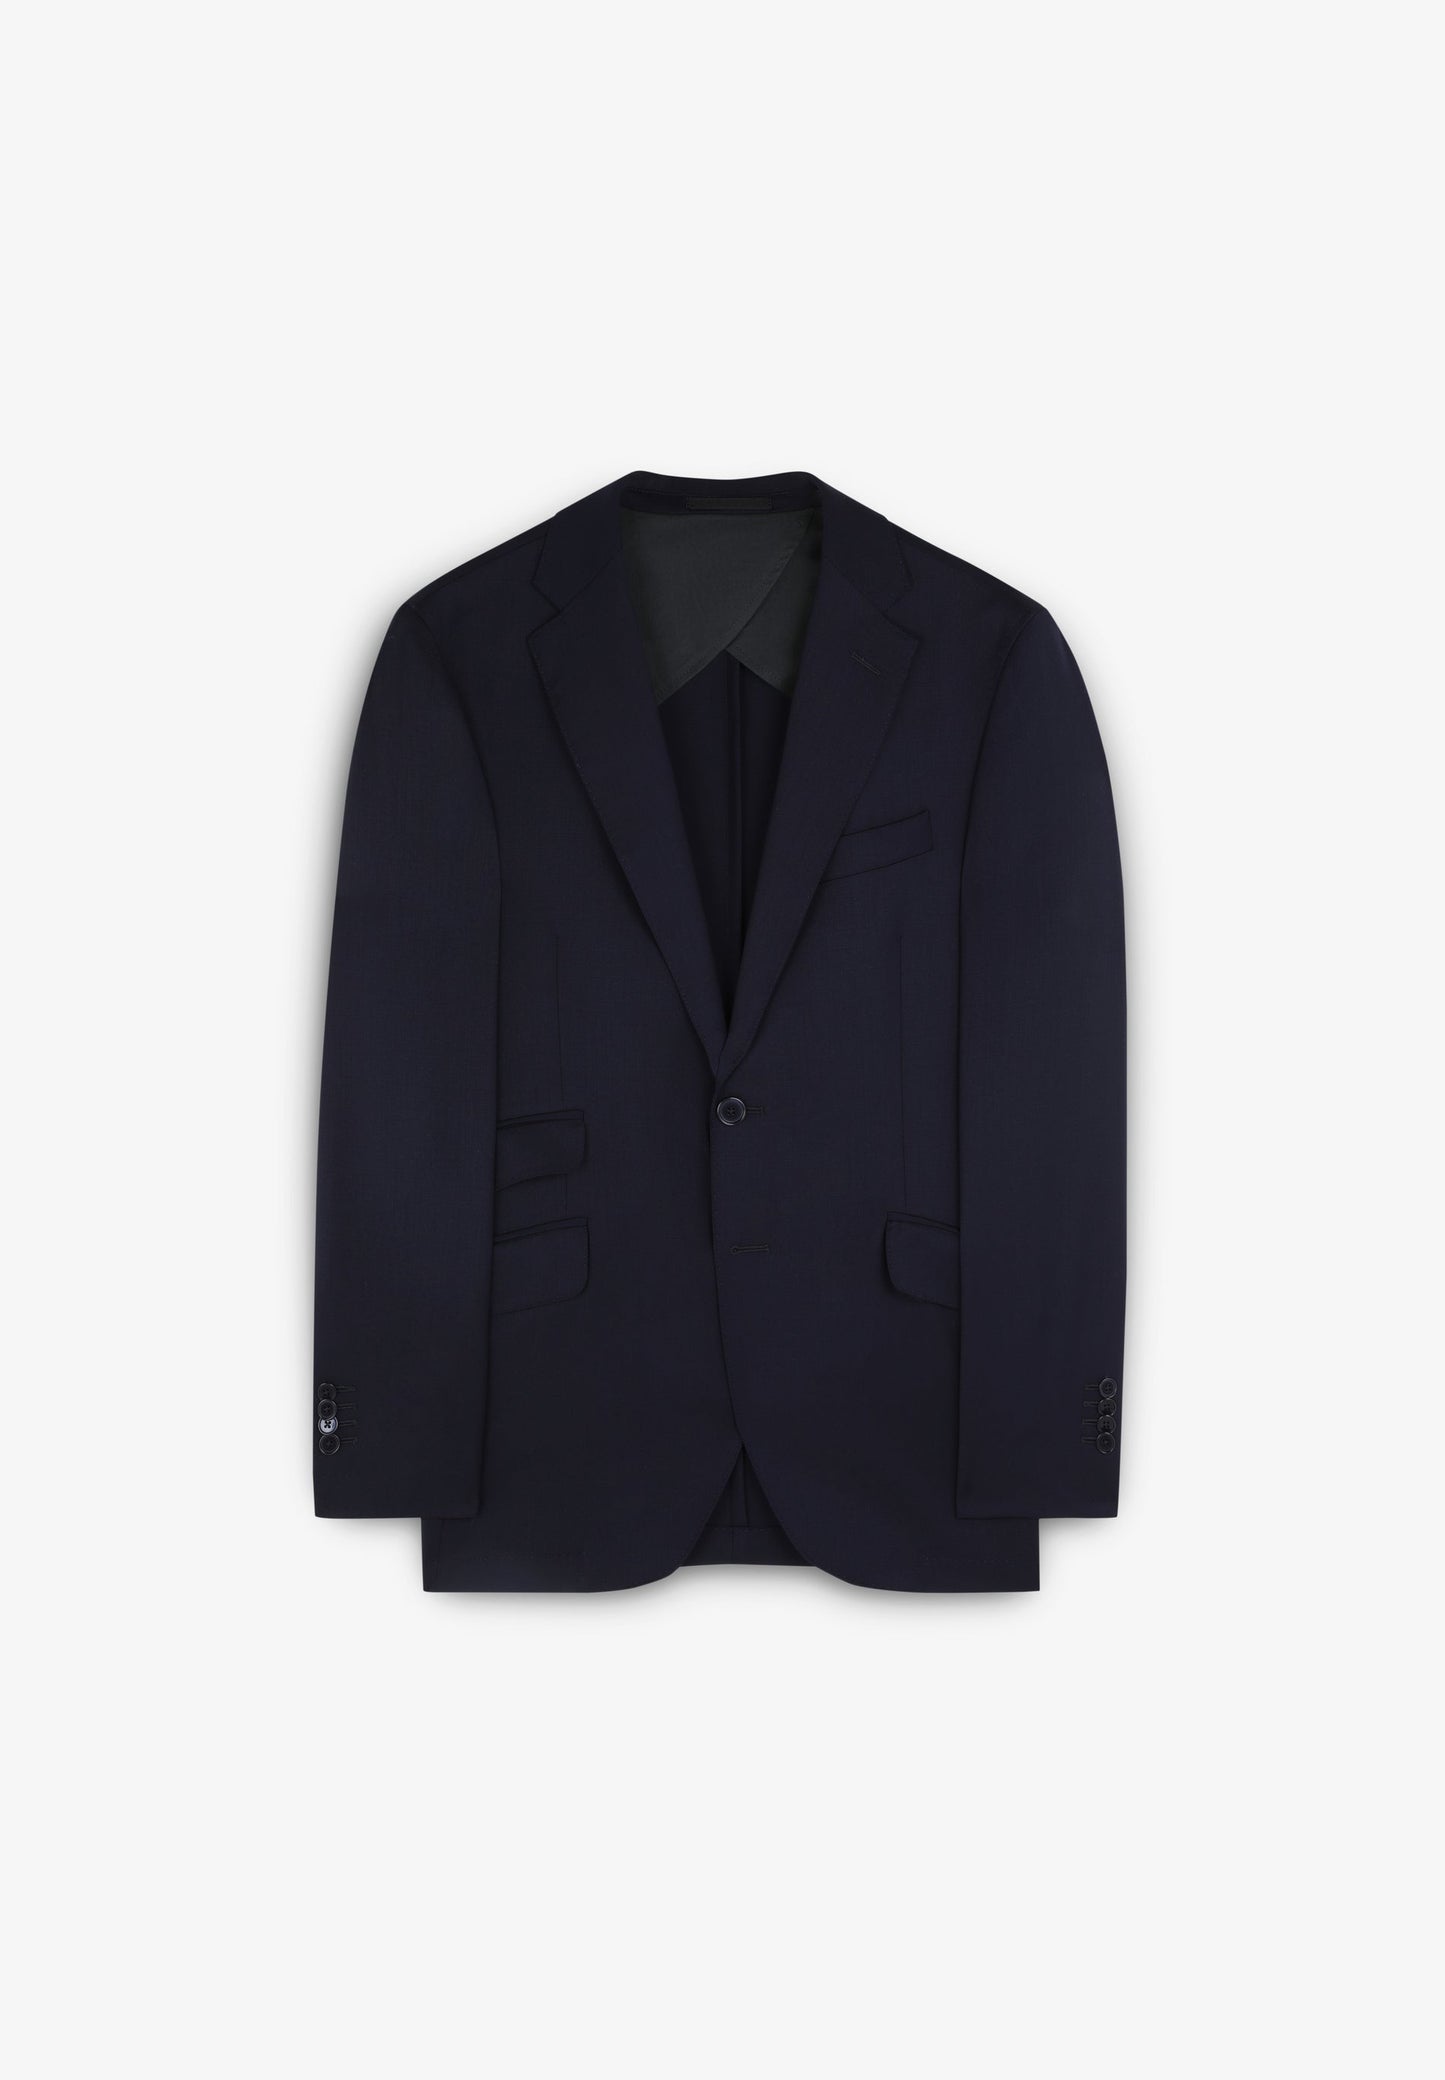 NAVY BLUE TEXTURED SUIT WITH POCKETS